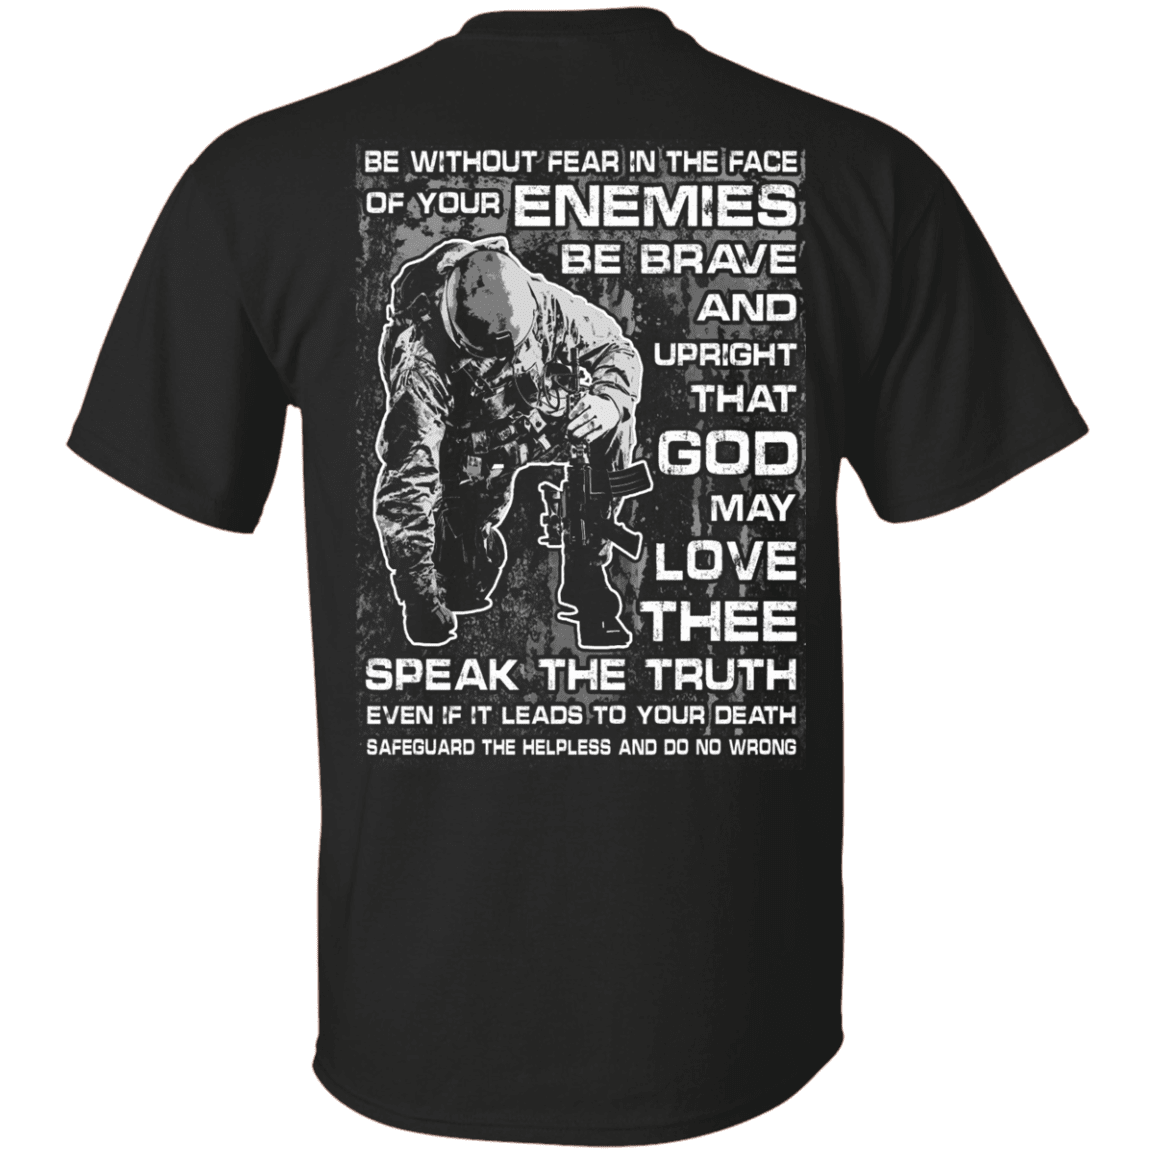 Military T-Shirt ”Be without Fear in The Face” Men Back